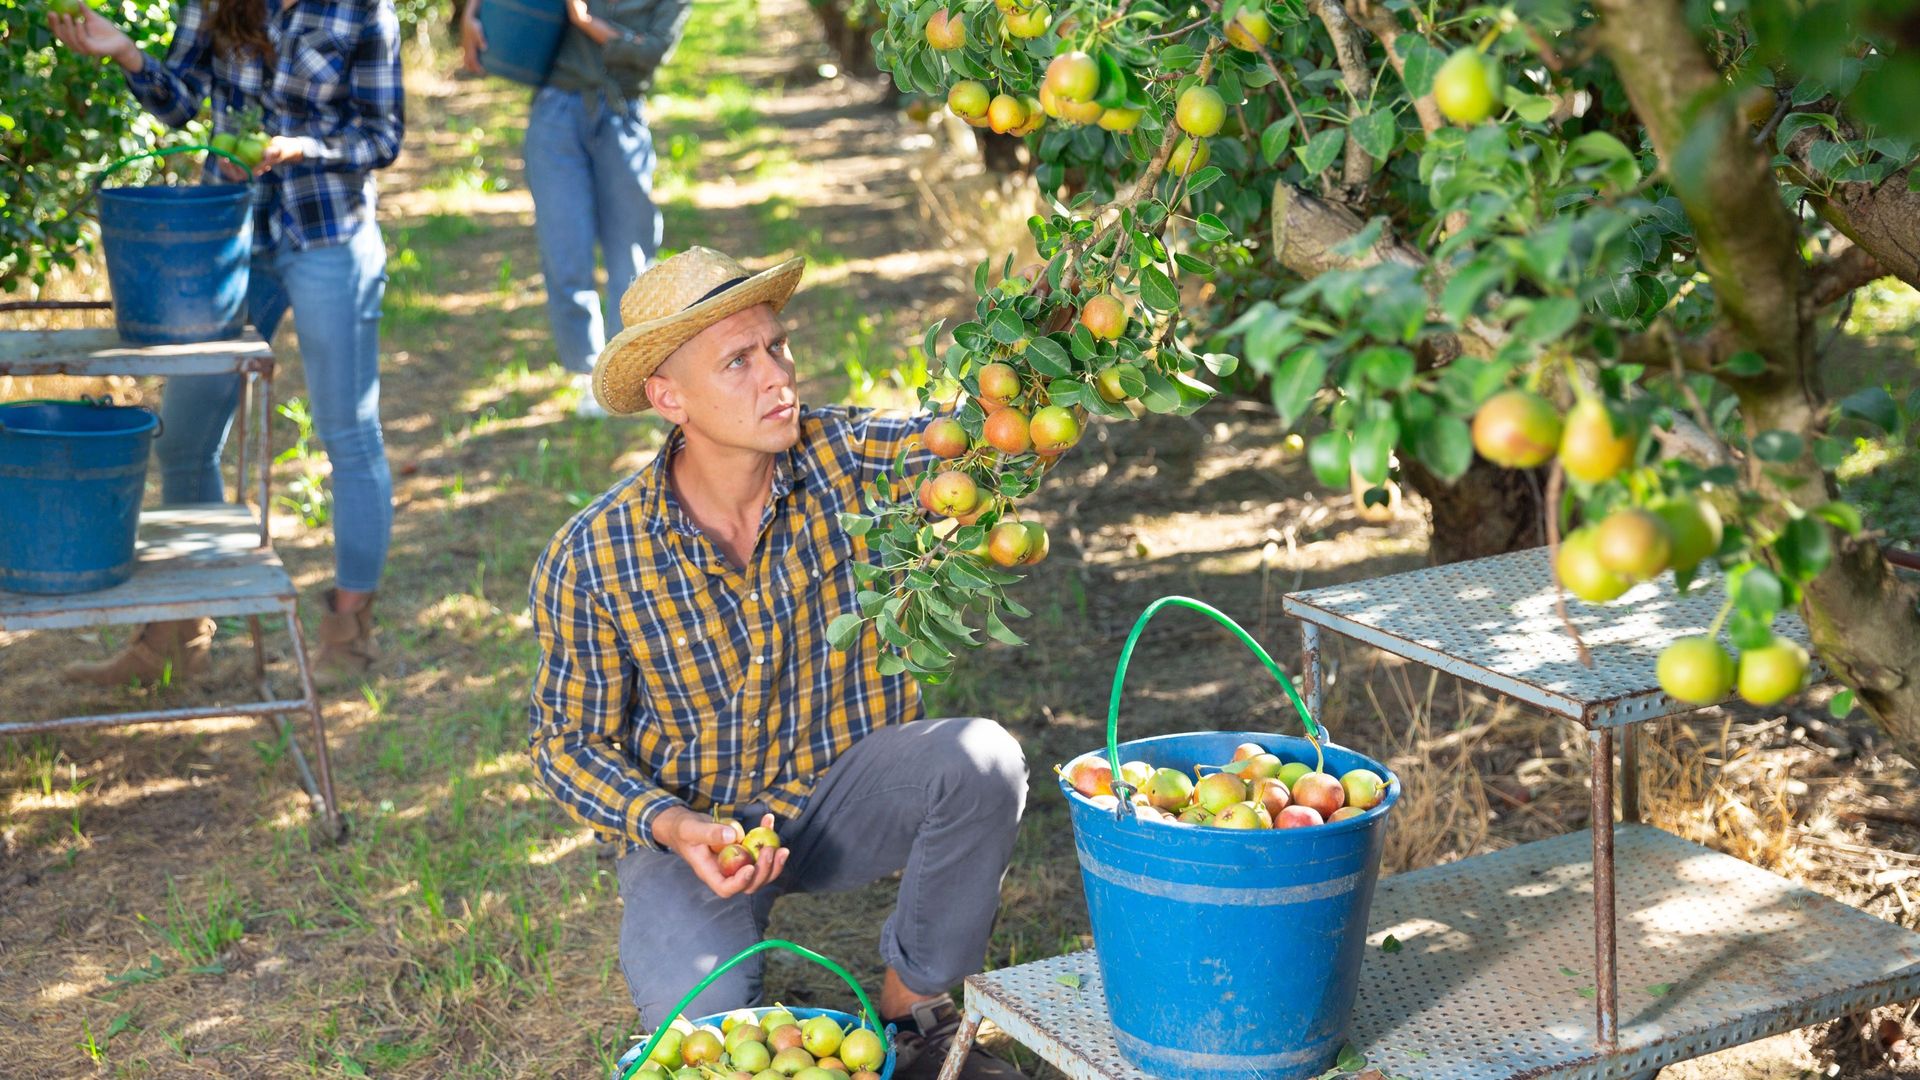 Farm workers pick apples in an orchard